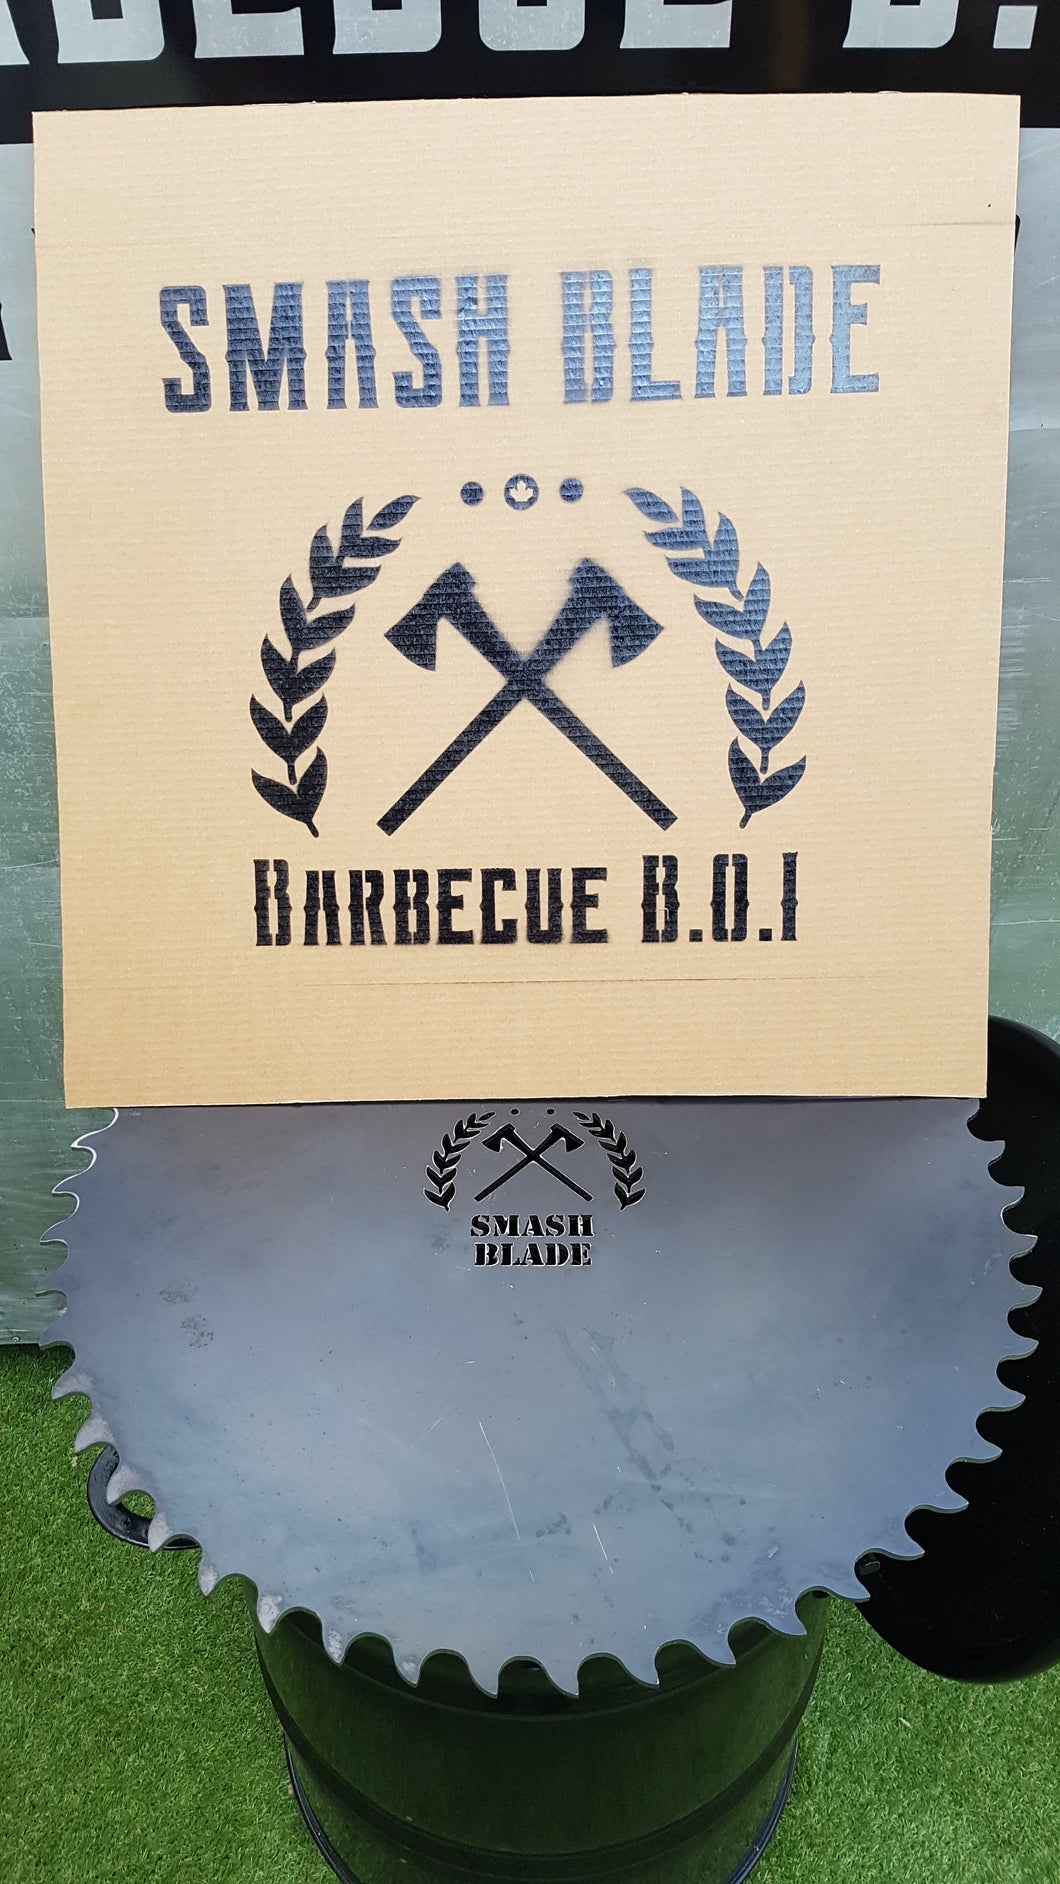 The Smash Blade (545mm) hot plate by Barbecue B.O.I.